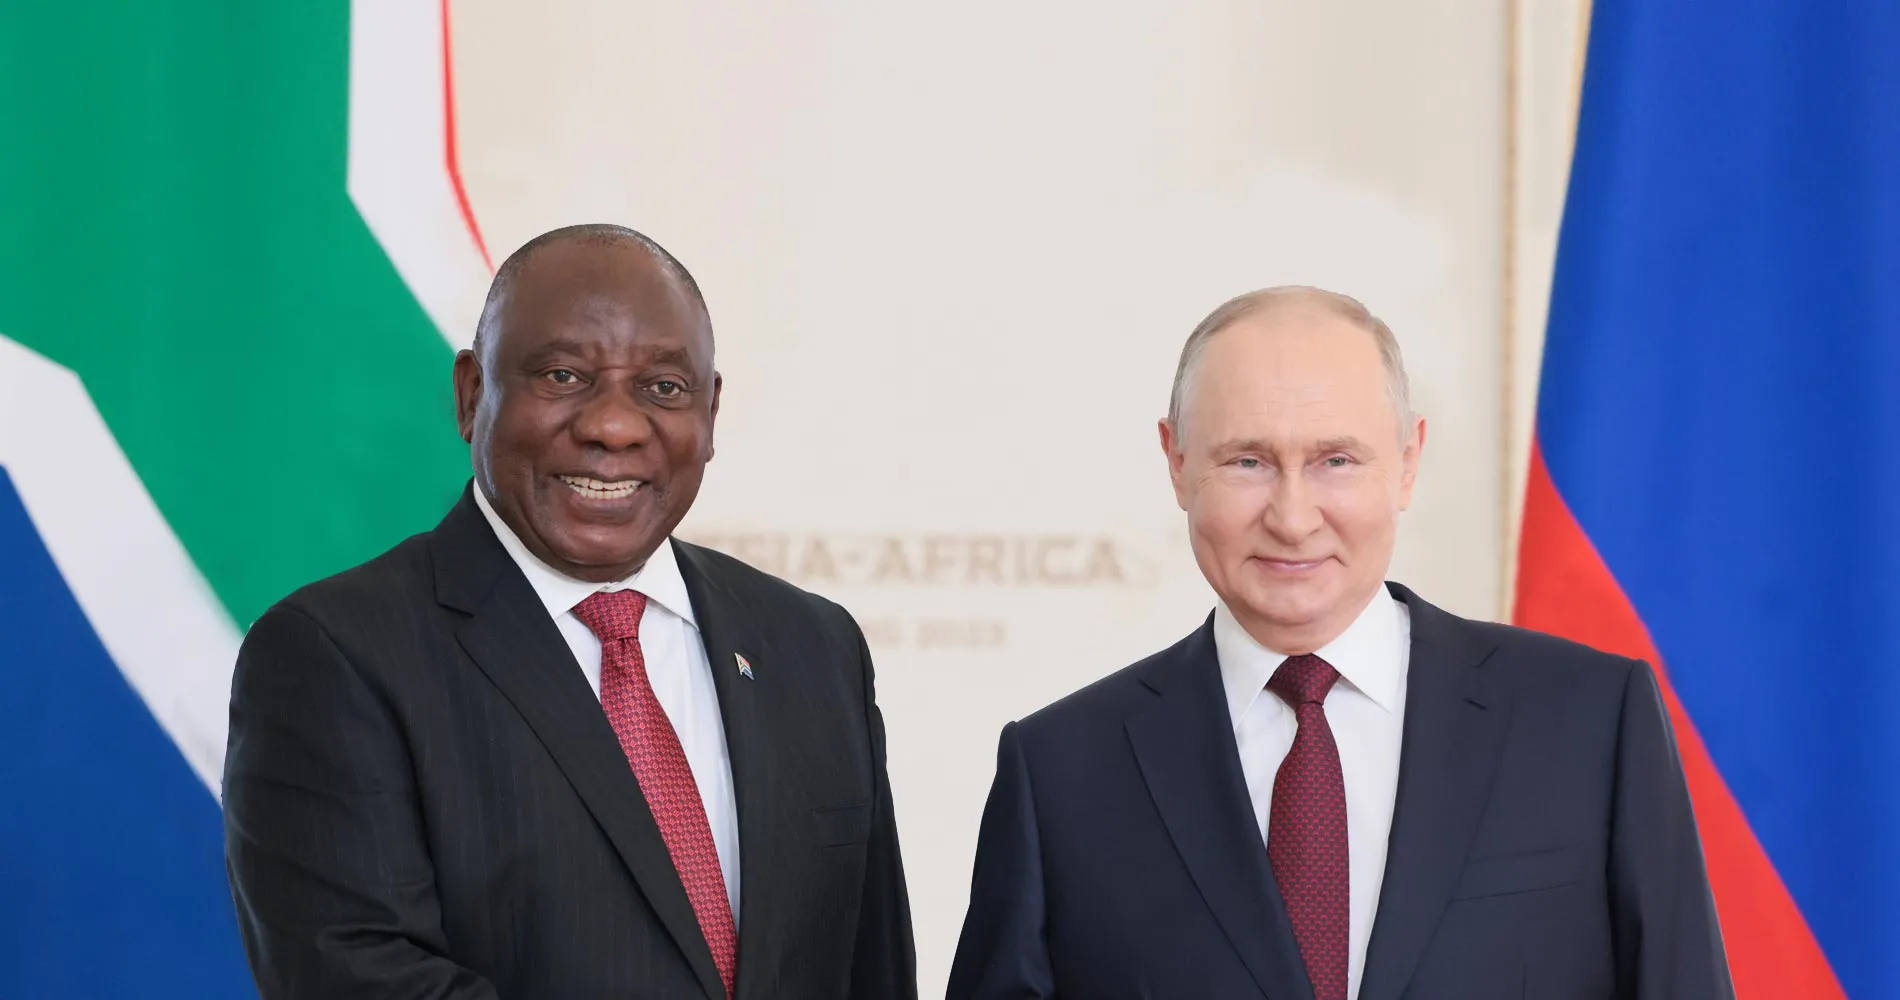 Russia Supplies Nuclear Power Options to Africa